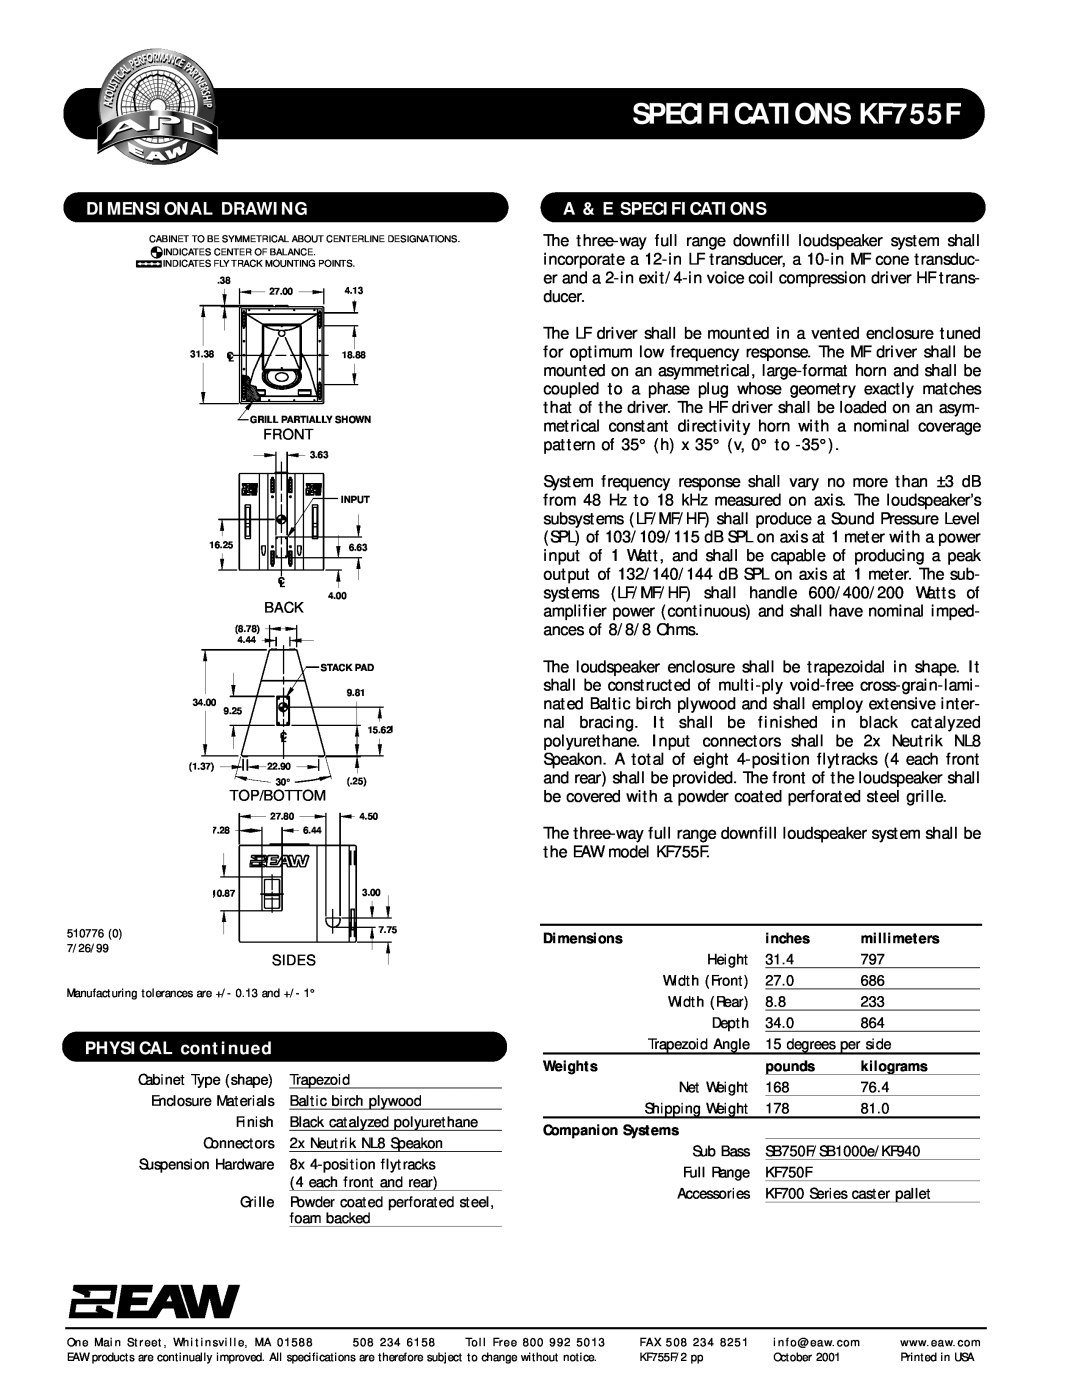 EAW Dimensional Drawing, A & E Specifications, PHYSICAL continued, SPECIFICATIONS KF755F, inches, millimeters, Weights 